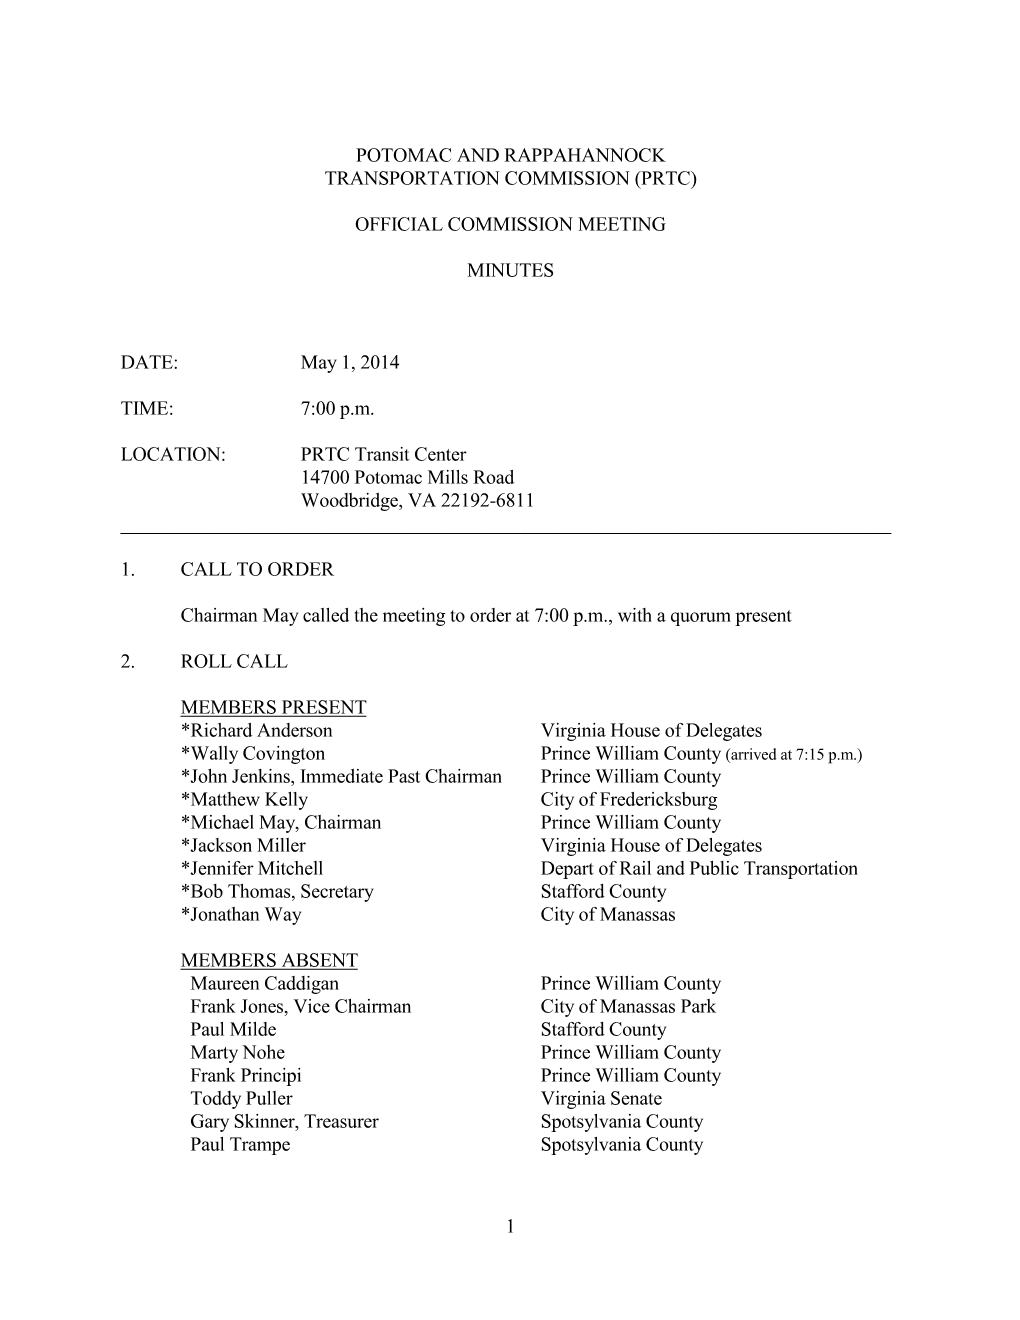 Official Commission Meeting Minutes Date